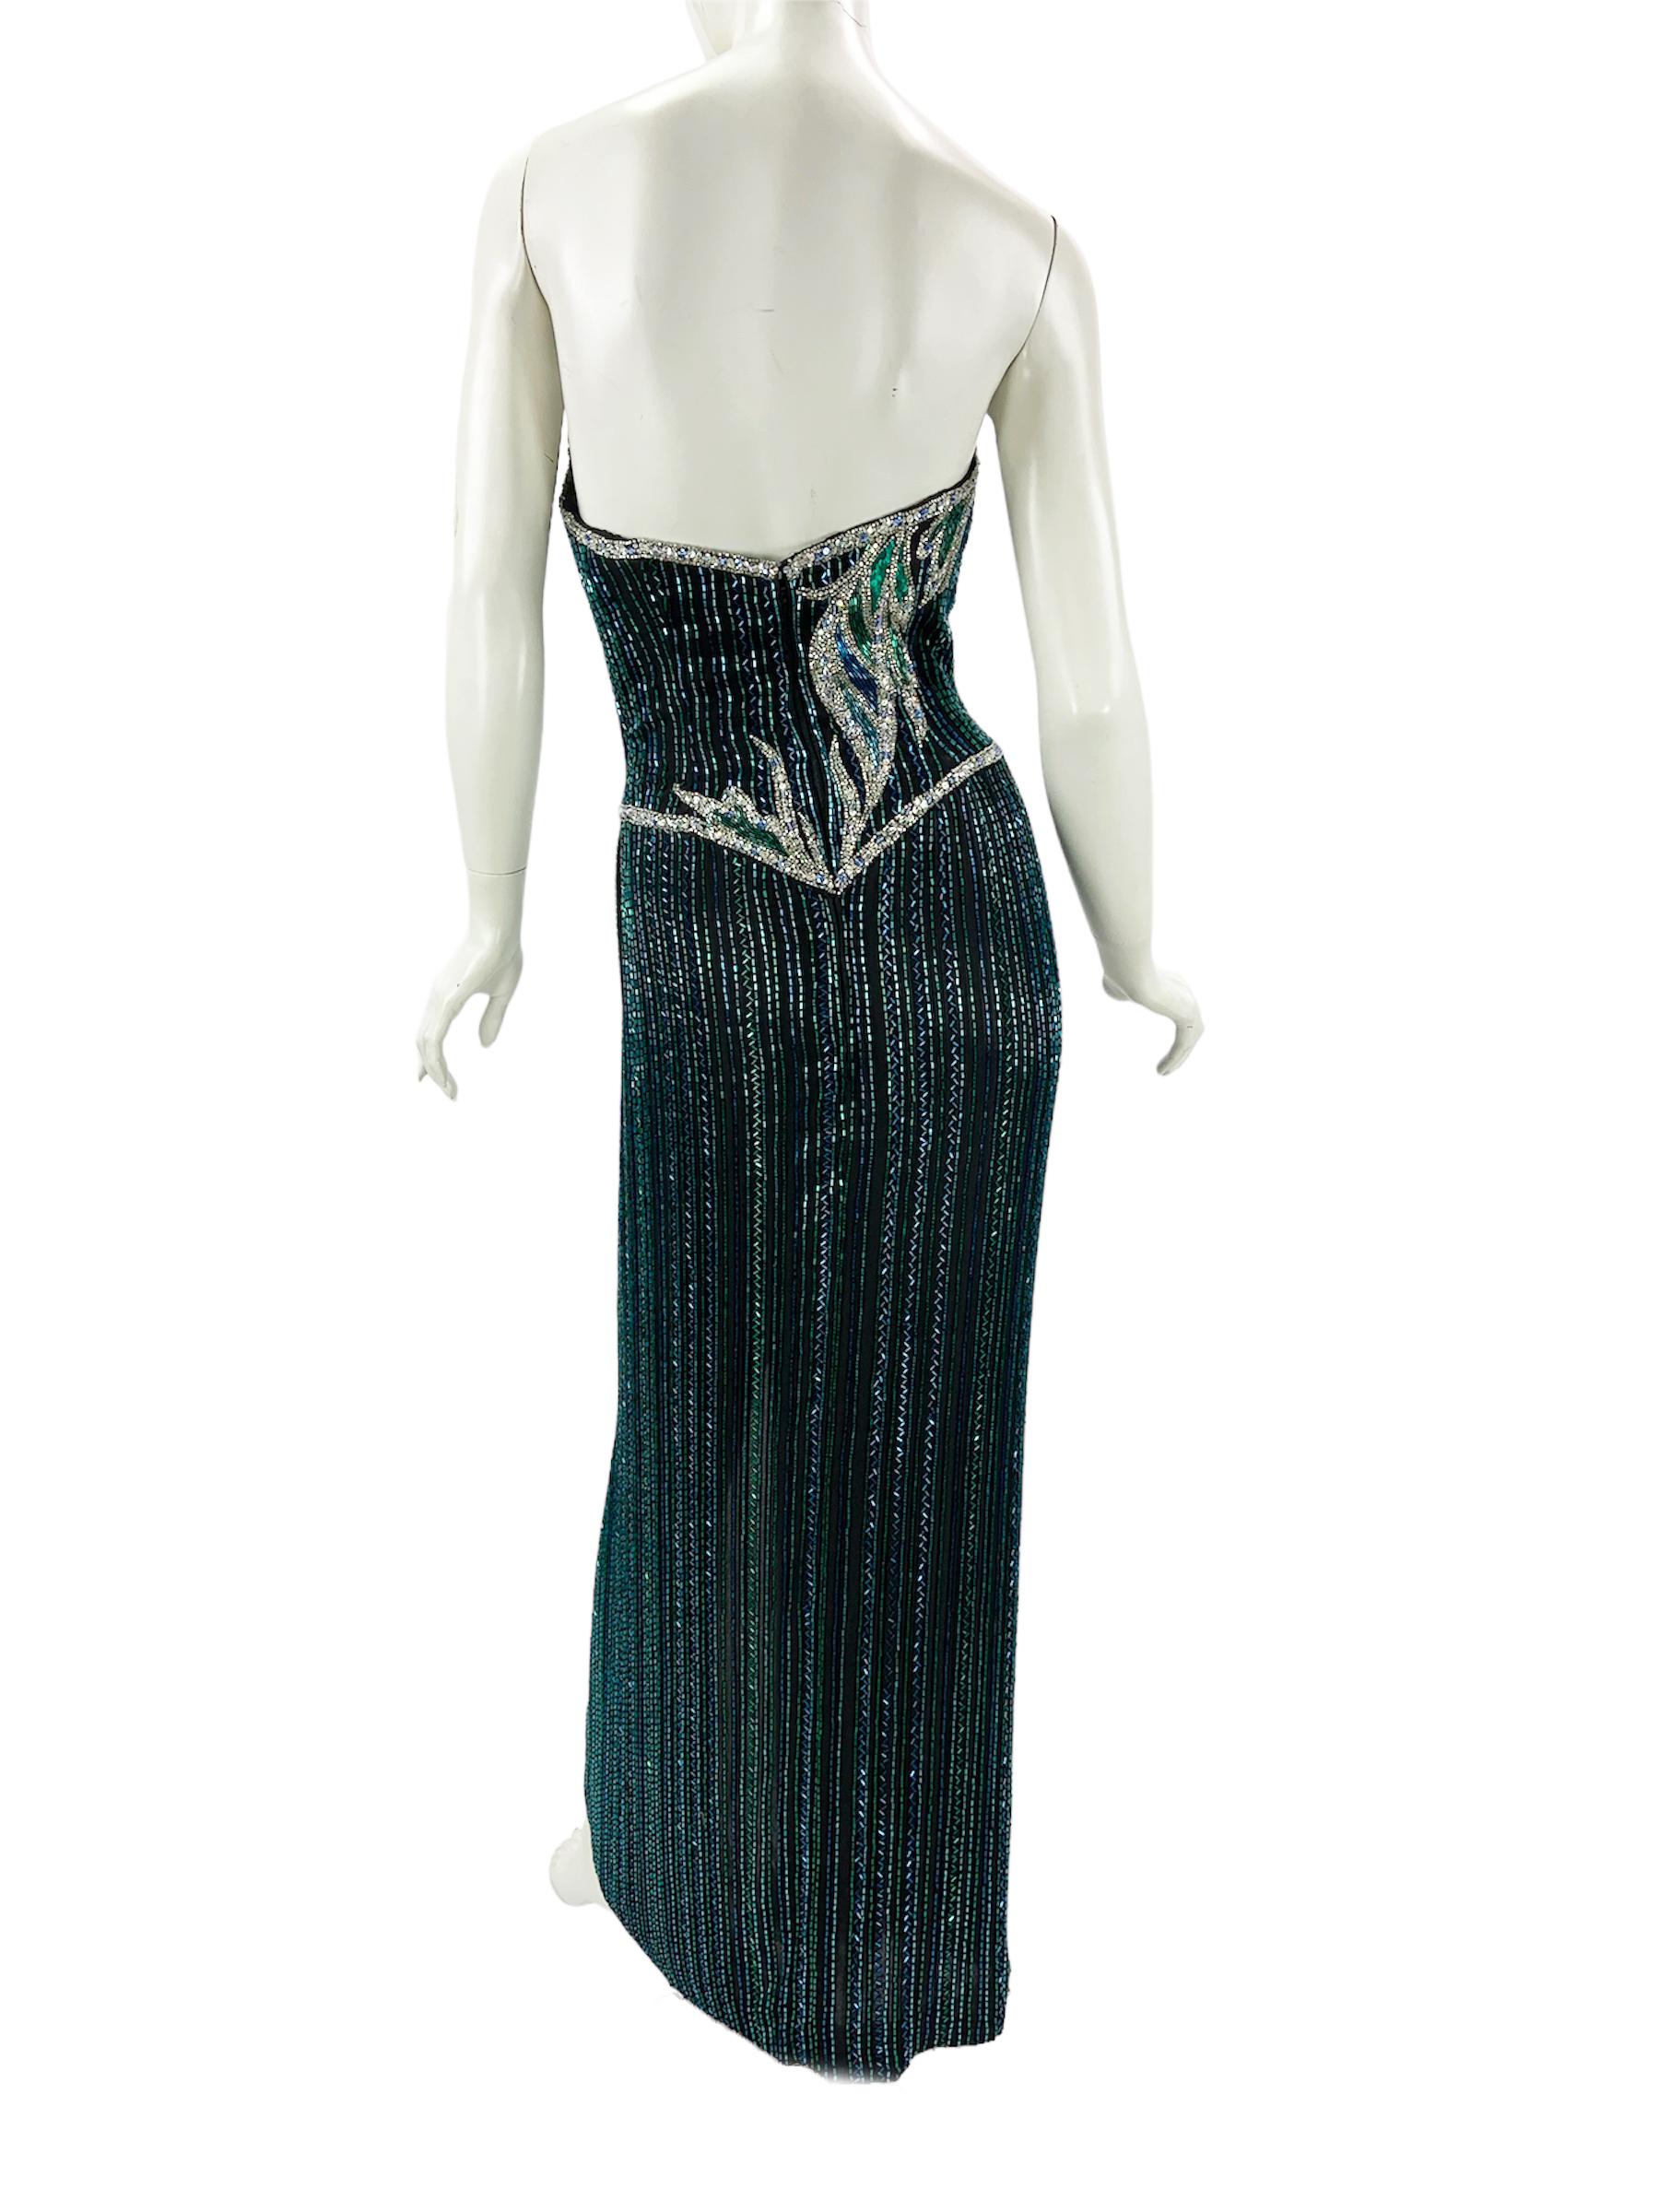 Vintage 80s Bob Mackie Boutique Green Blue Fully Beaded Silk Evening Dress Gown  For Sale 1